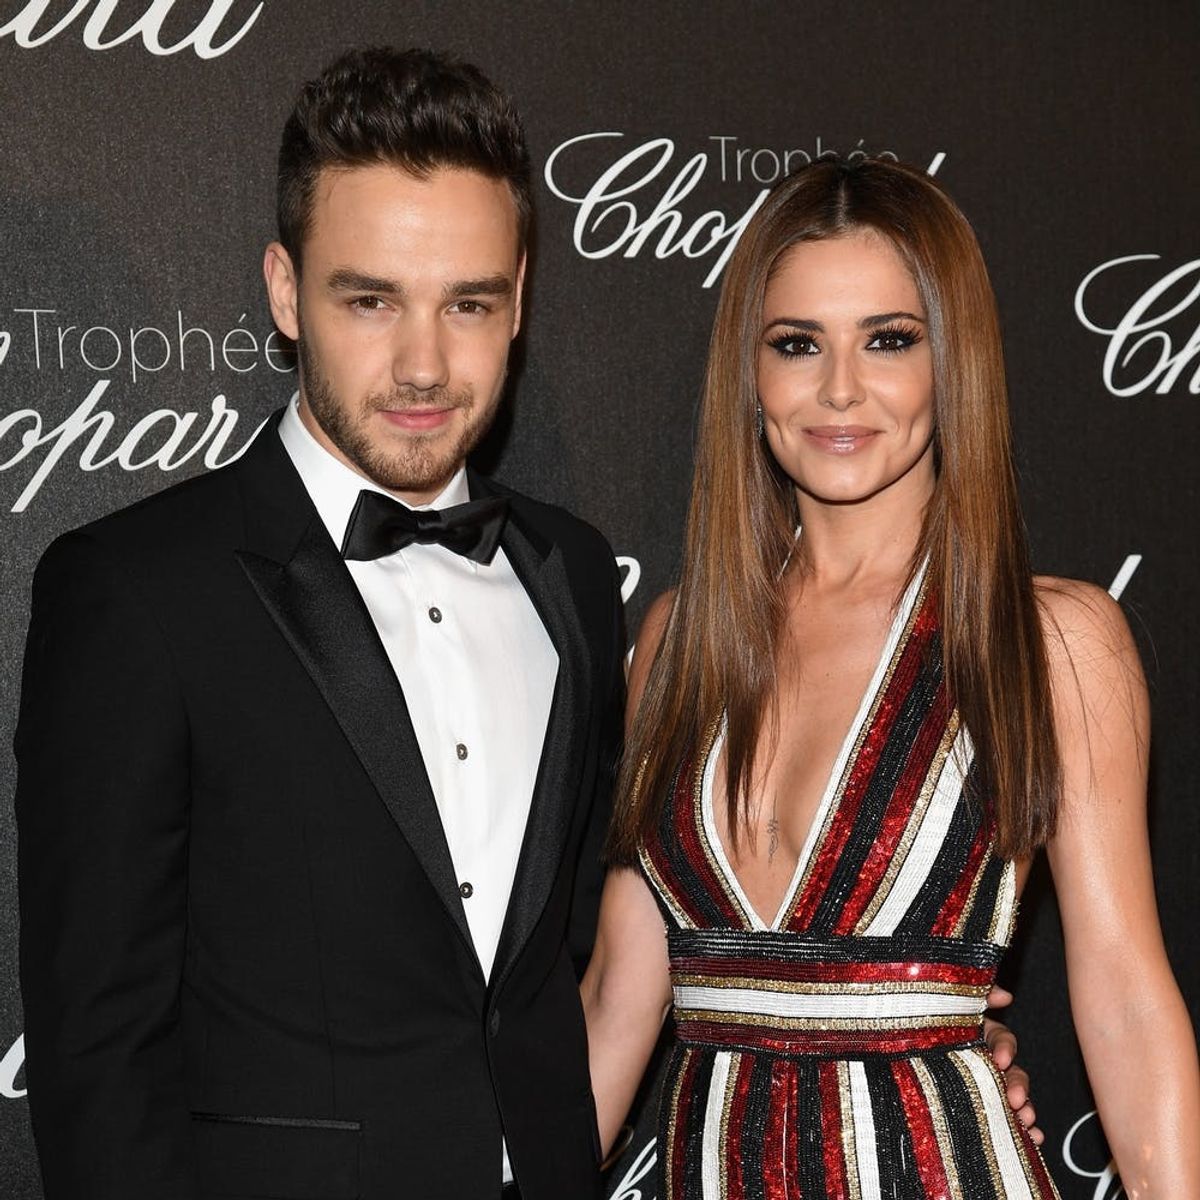 Liam Payne and Cheryl Cole Split After More Than 2 Years Together